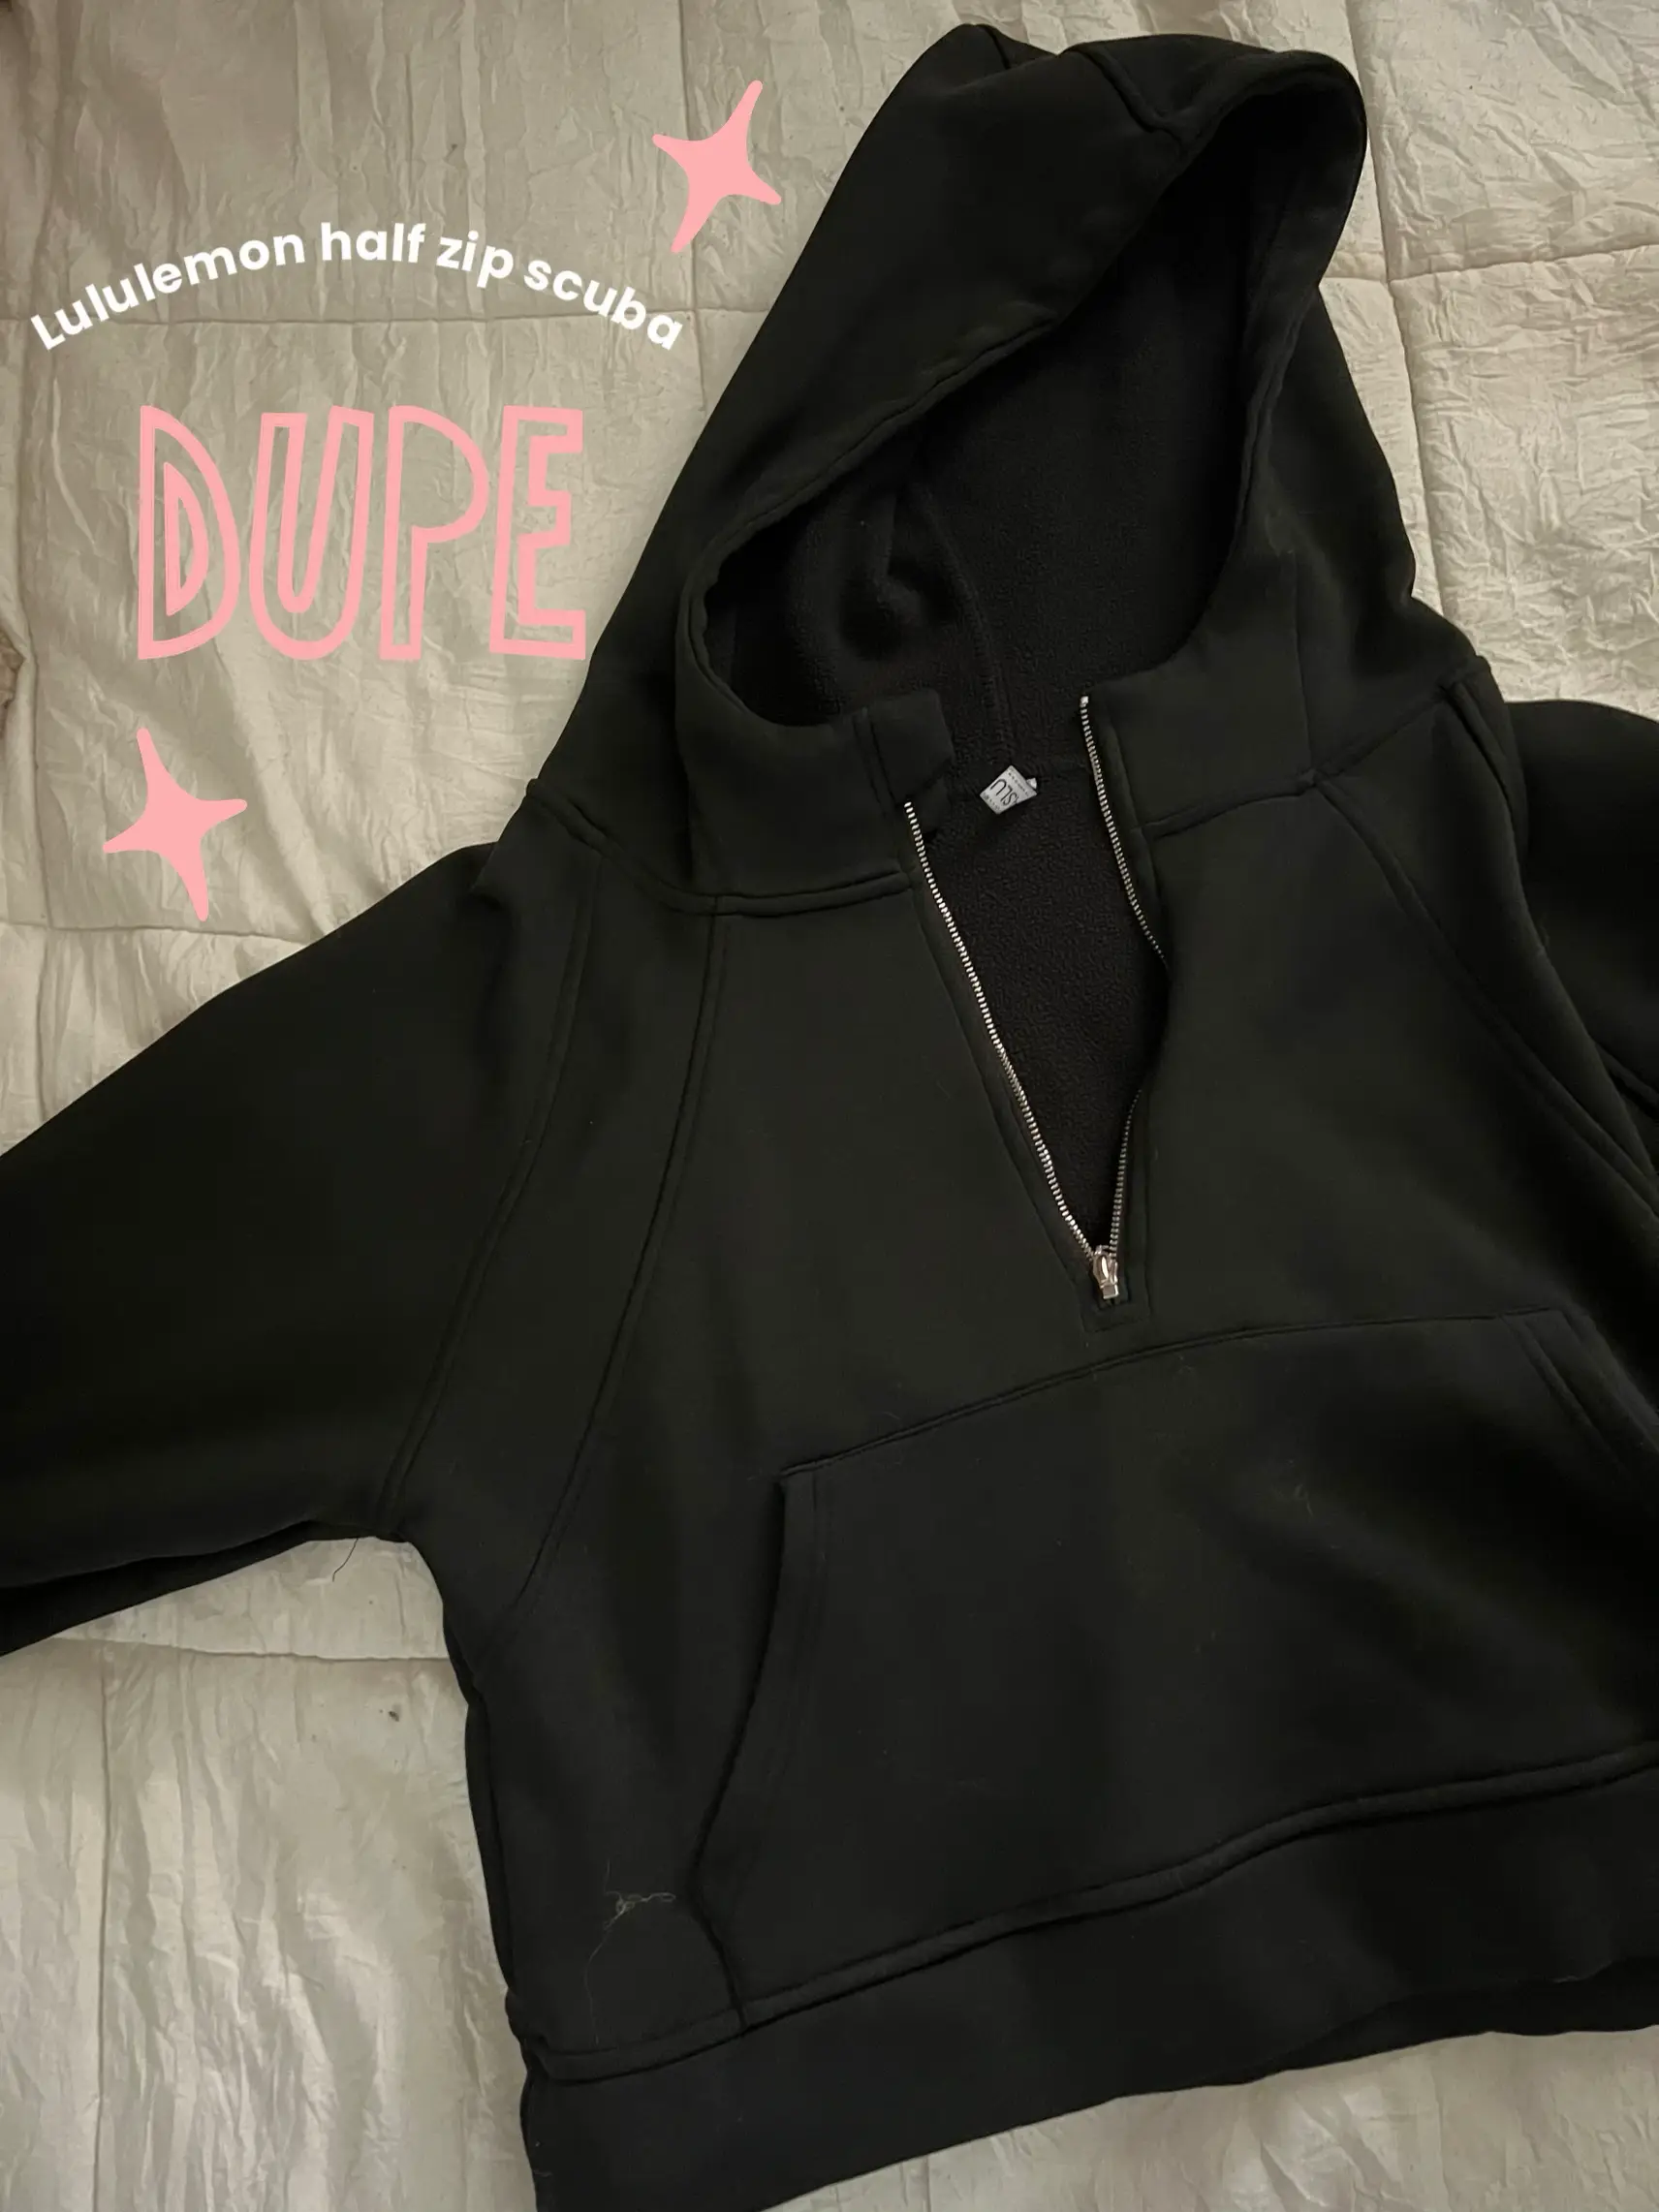 Lululemon Scuba Hoodie Dupe That's Cheaper Than the Original